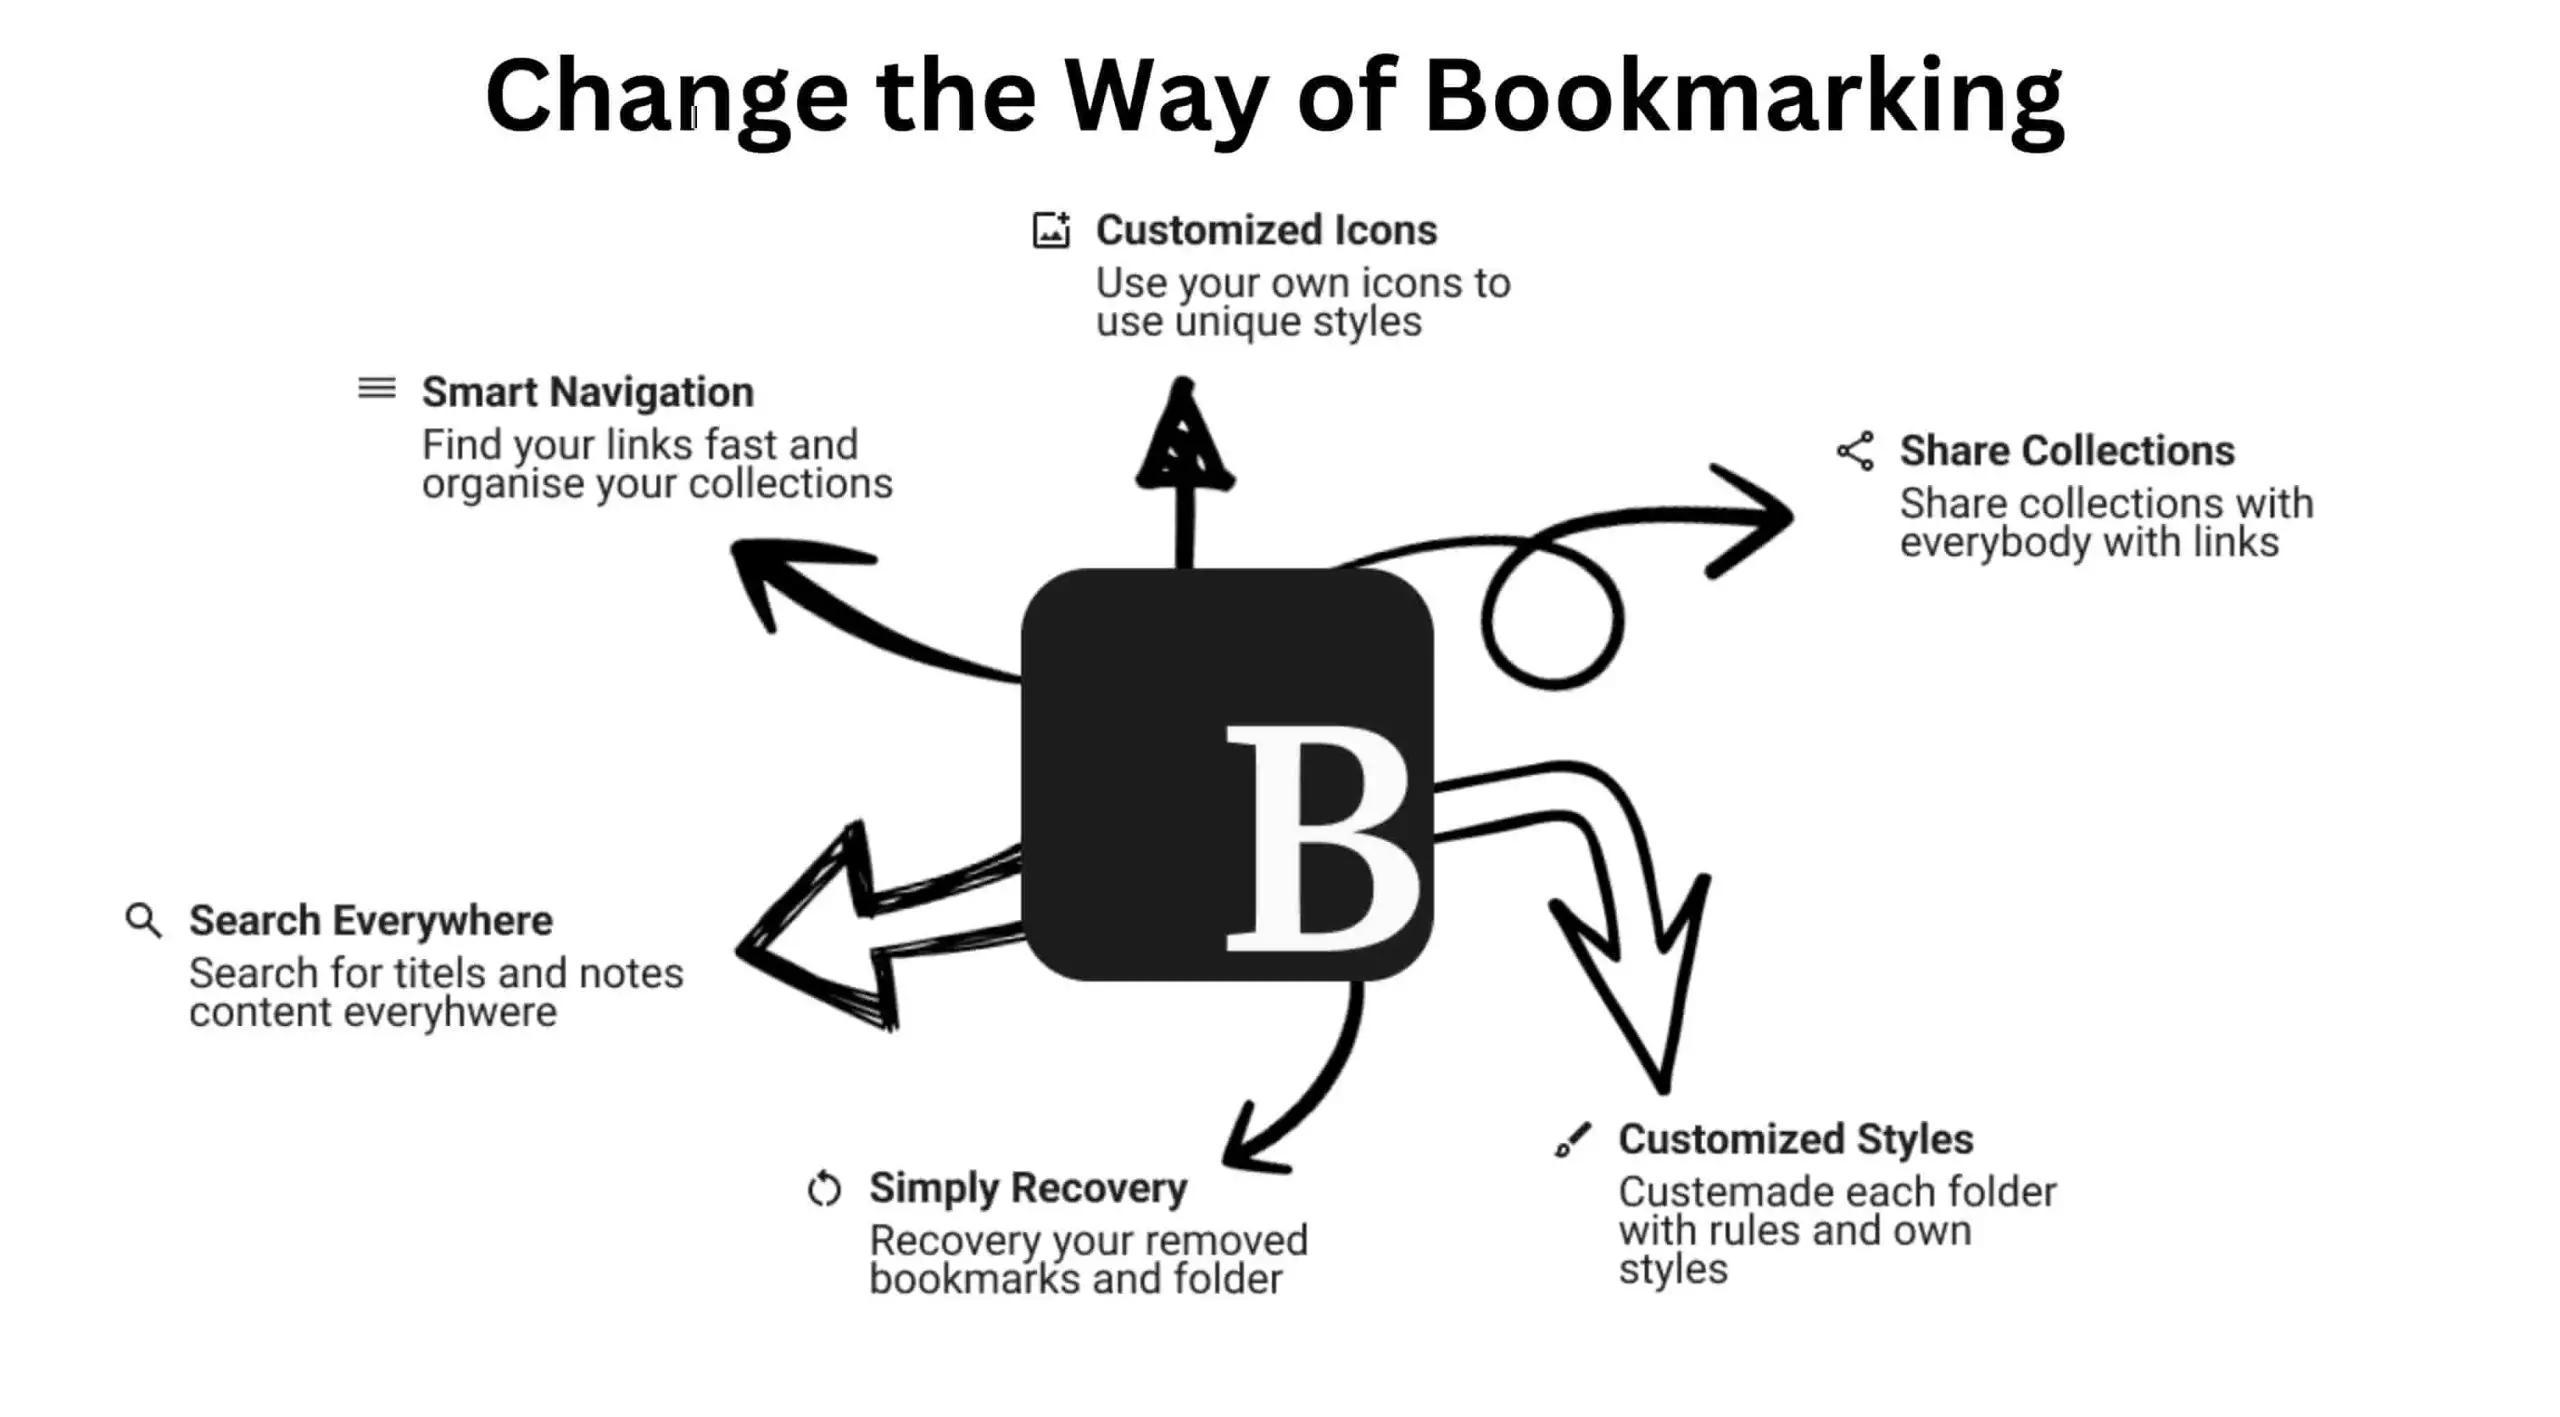 How Do I Manage My Online Bookmarks and Benefits?